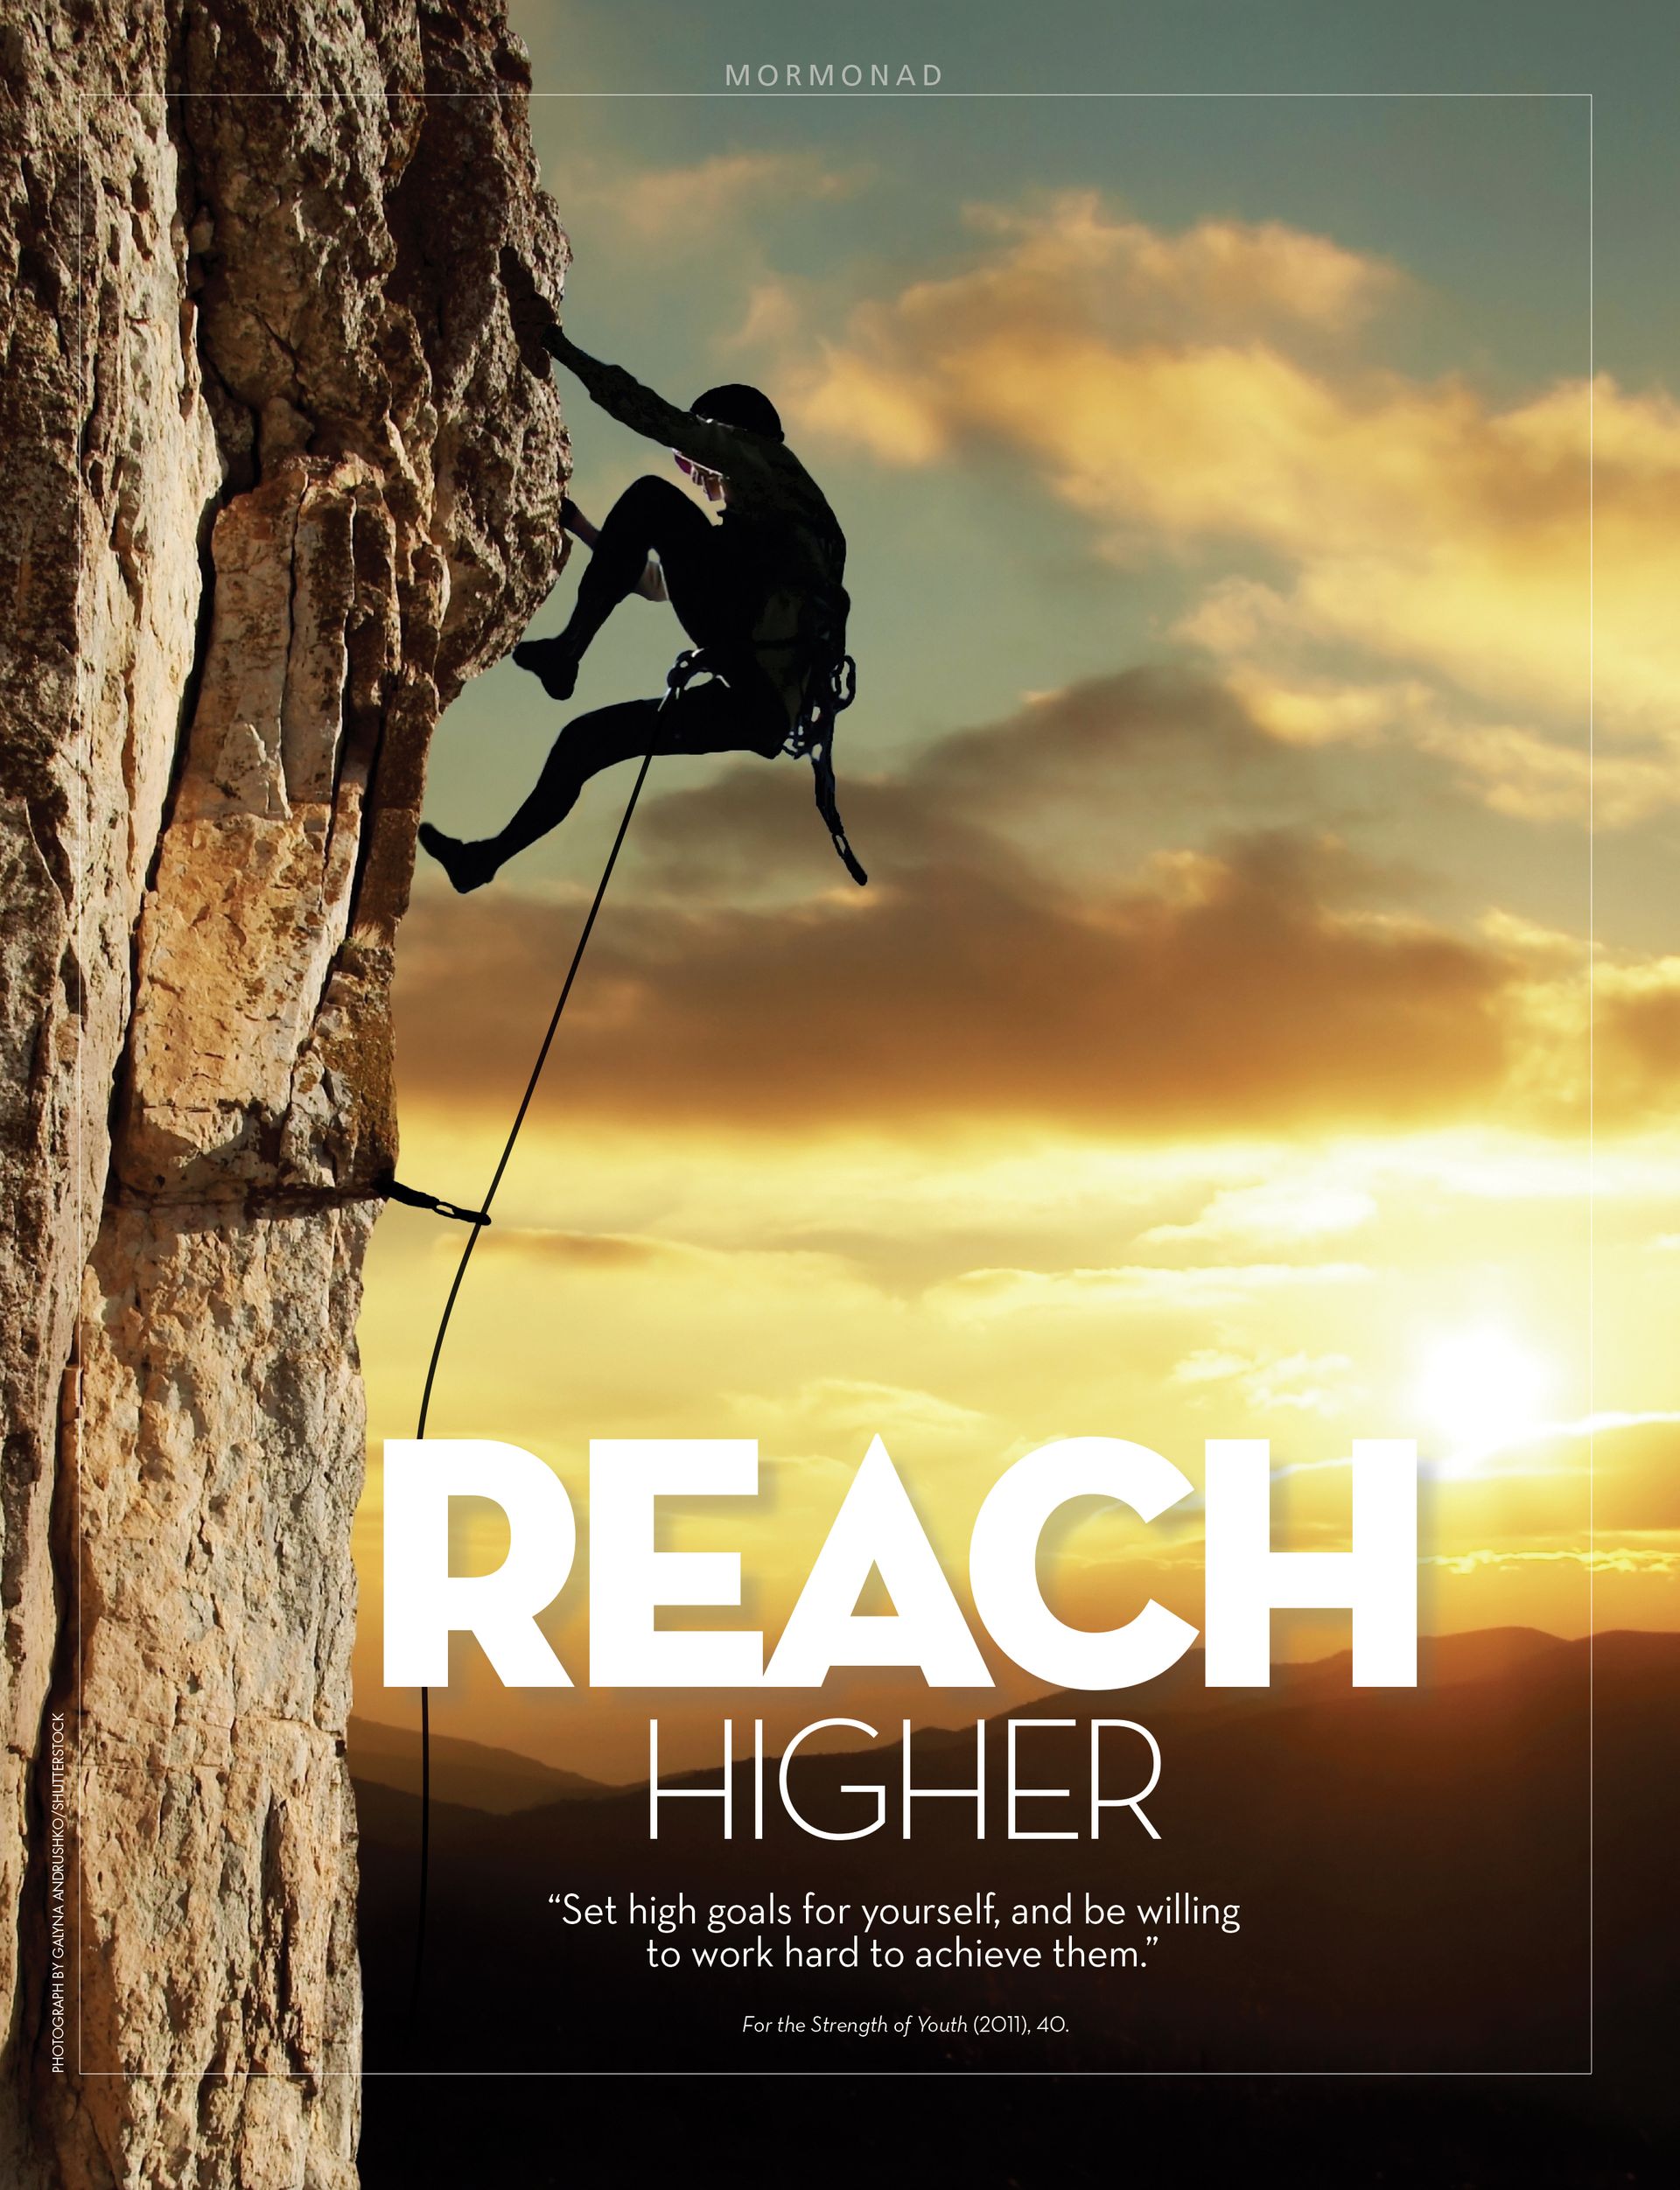 Reach Higher. “Set high goals for yourself, and be willing to work hard to achieve them.” For the Strength of Youth (2011), 40. Nov. 2012 © undefined ipCode 1.